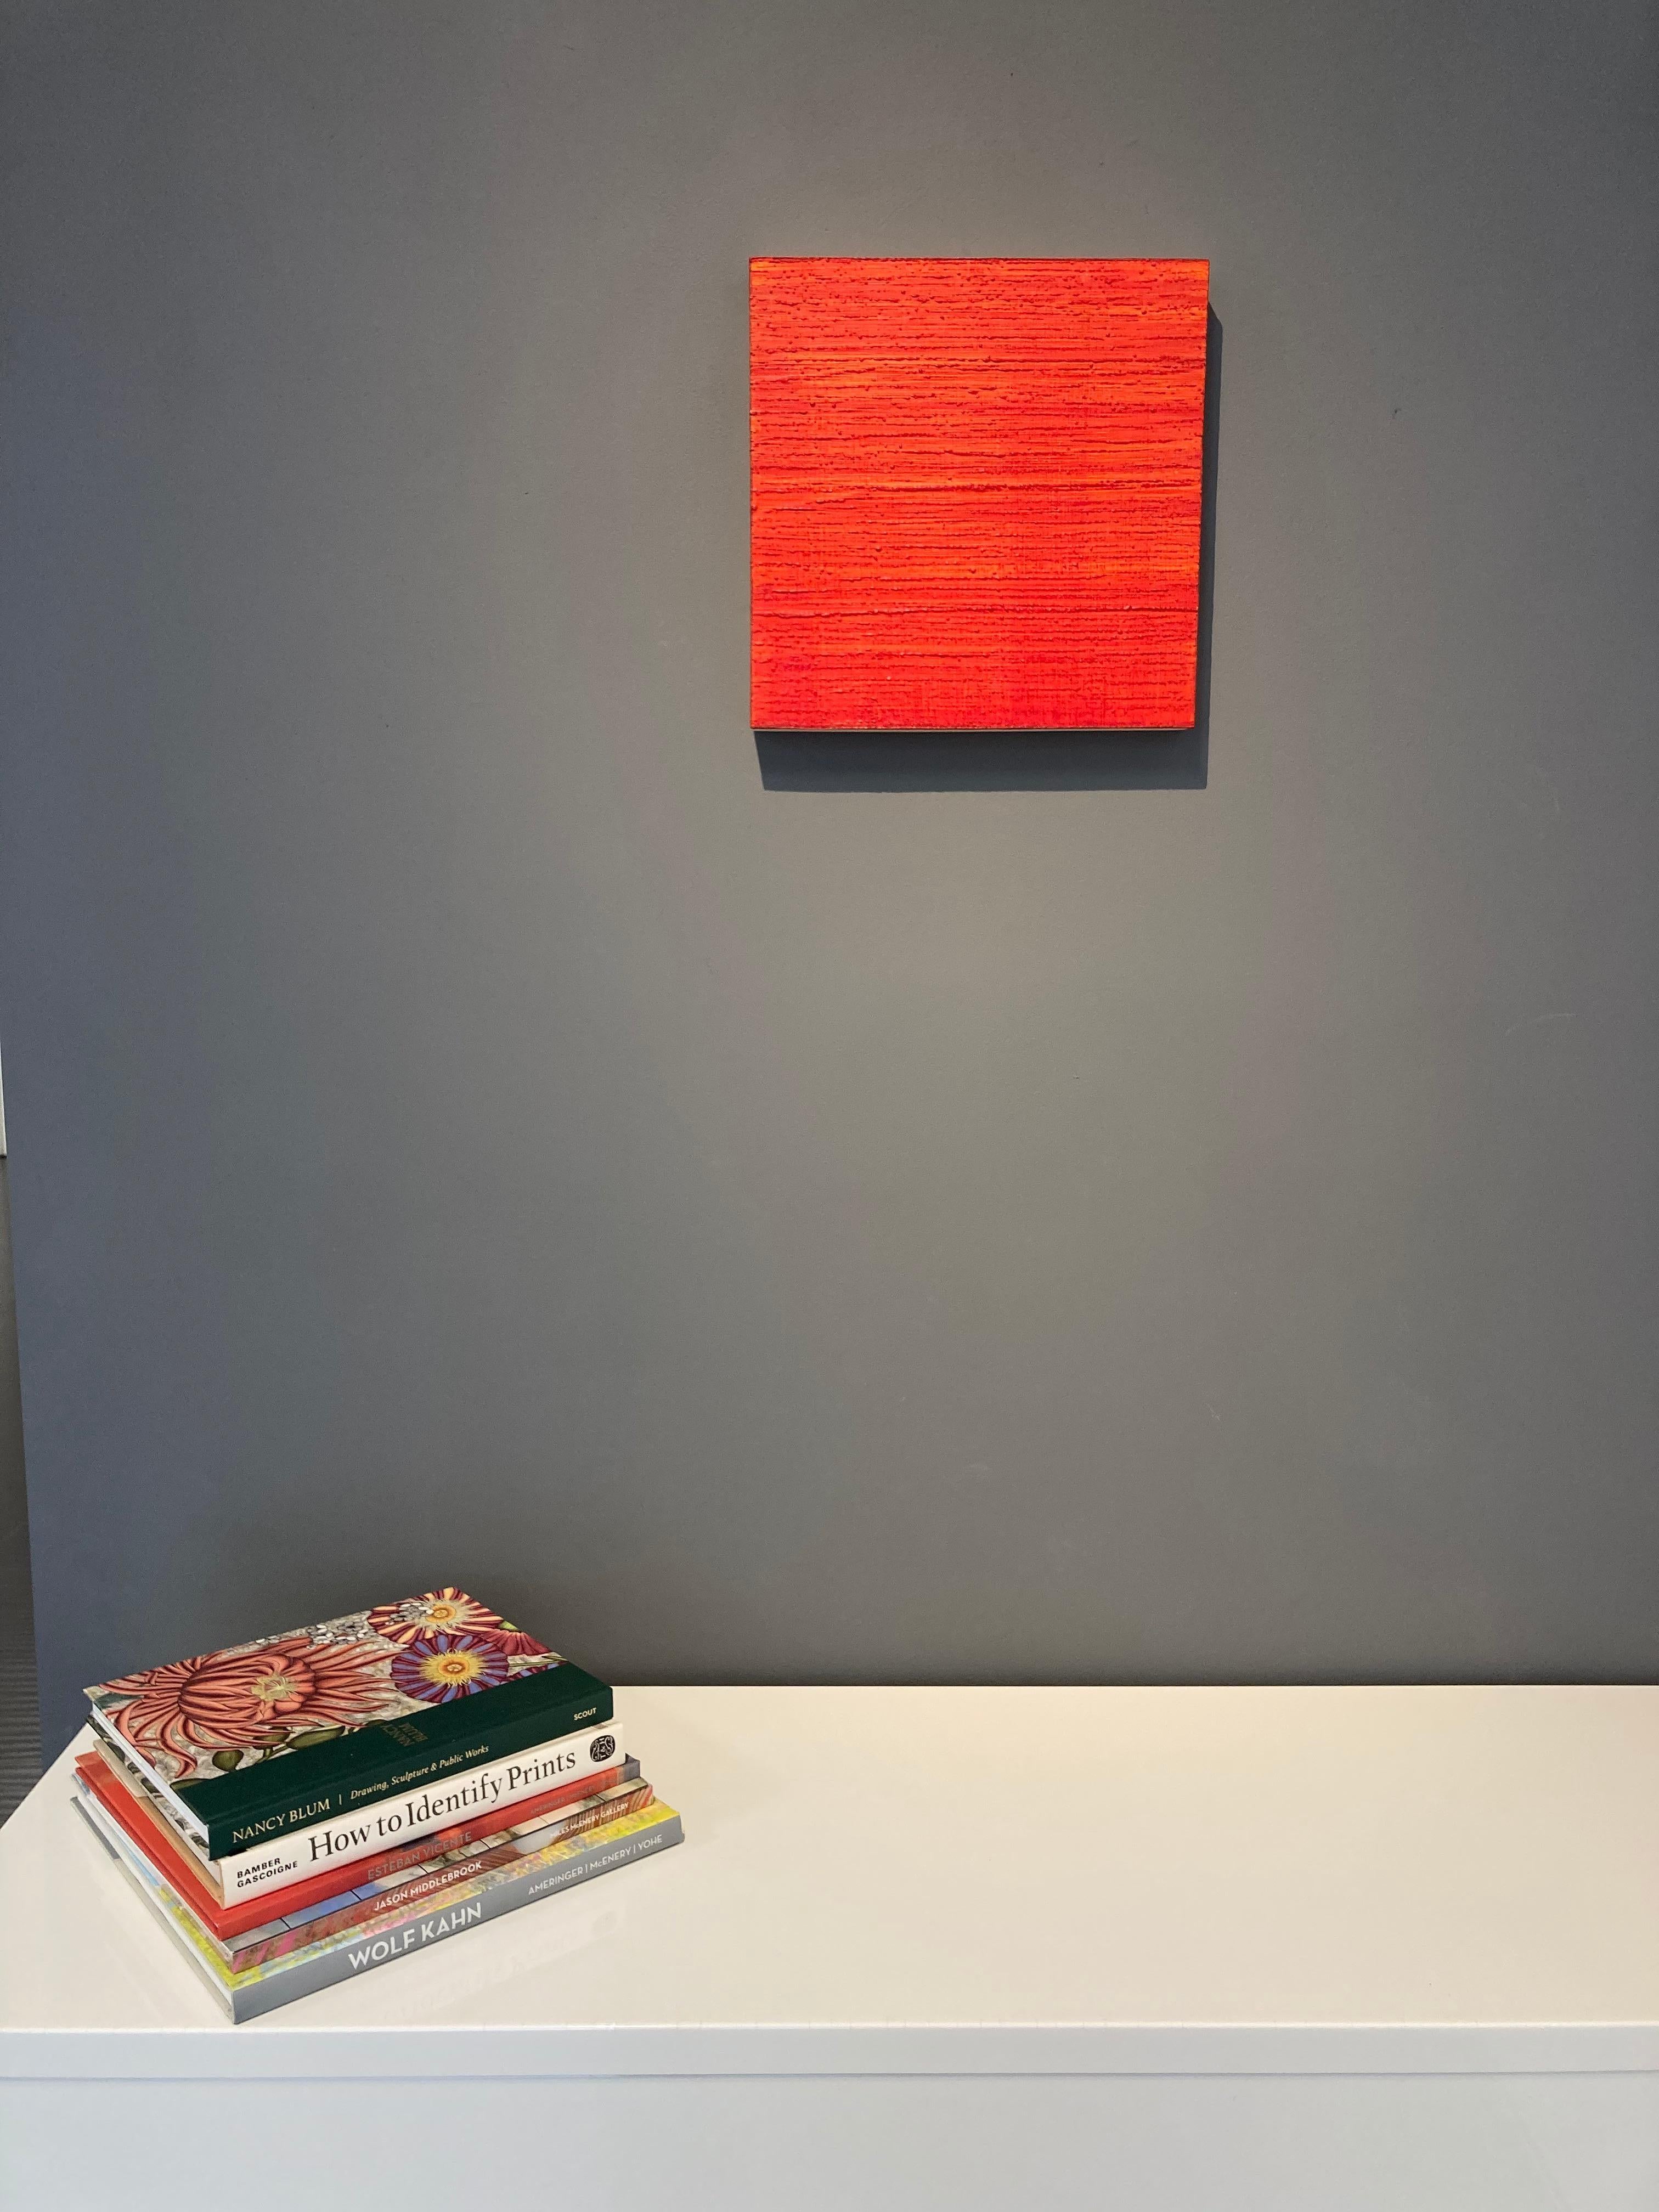 This is a vibrant, crimson red encaustic (pigmented beeswax) painting on birch panel with dark burgundy and light, golden orange accents. Signed, titled and dated on verso.

Joanne Mattera’s paintings can be described as lush minimalism, the work is